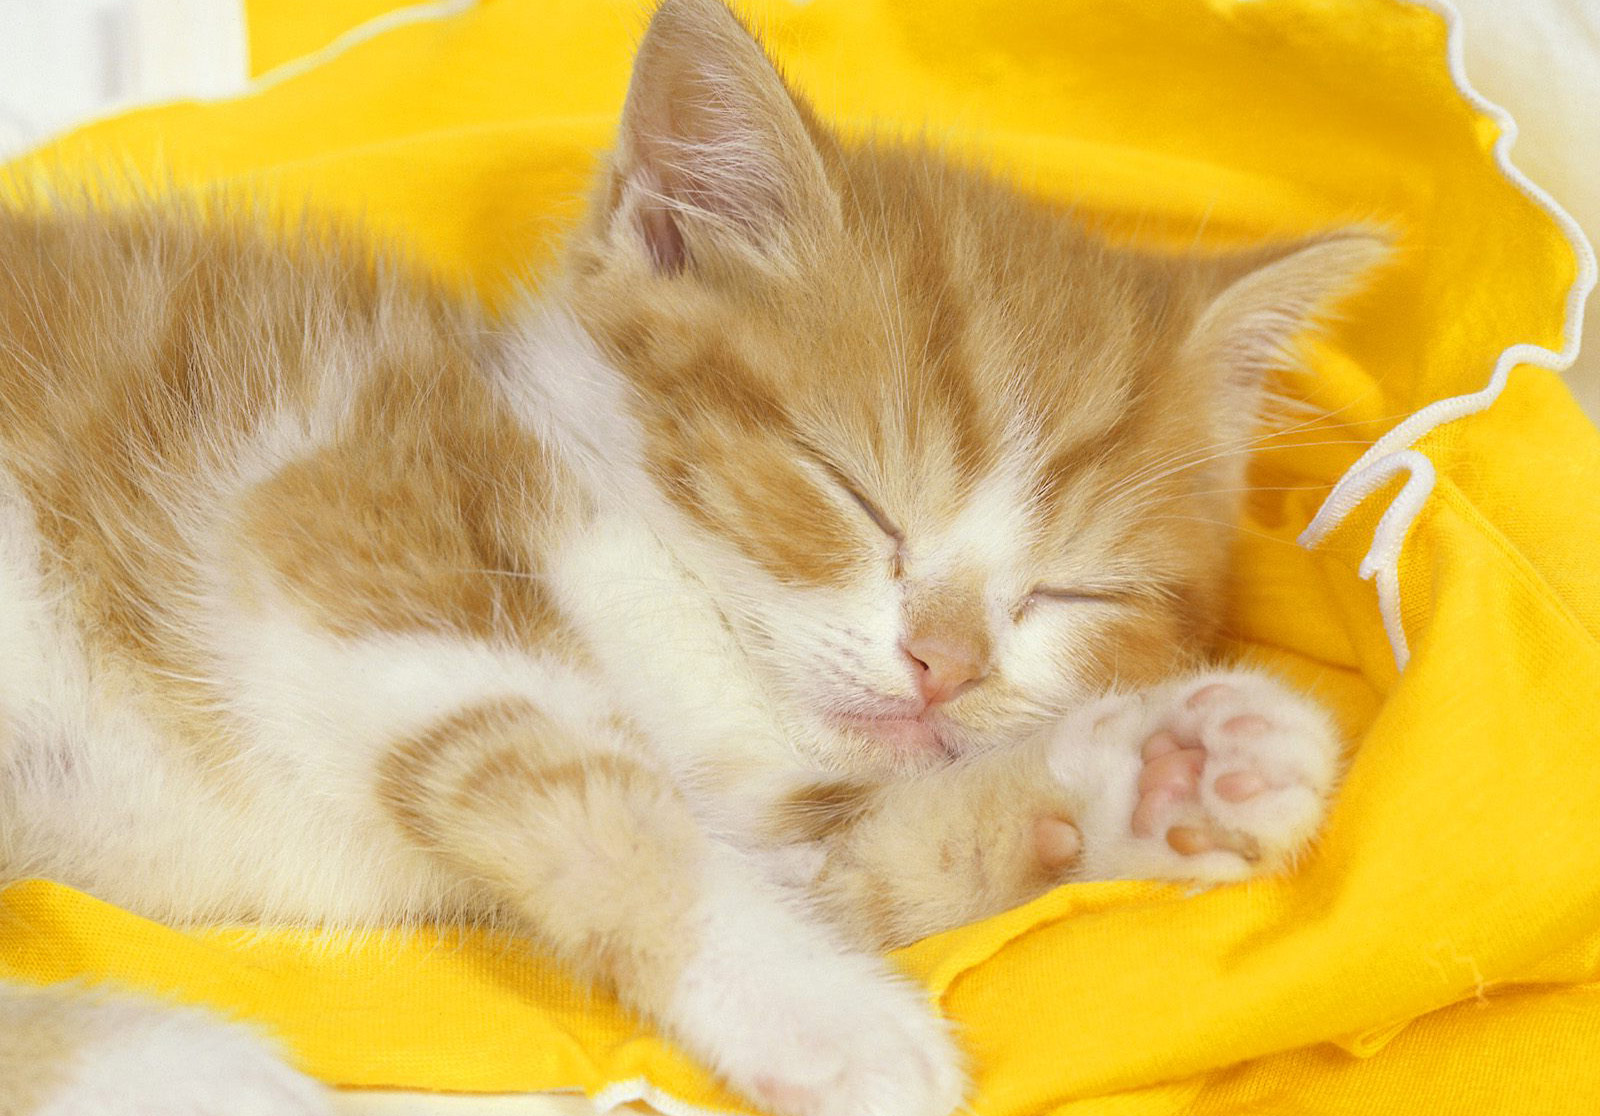 Wallpaper, yellow, kittens, whiskers, kitten, cat like mammal, snout, small to medium sized cats, carnivoran, domestic short haired cat, european shorthair, american shorthair, puss, 1600x1116 px, lovely desktop image, cat image